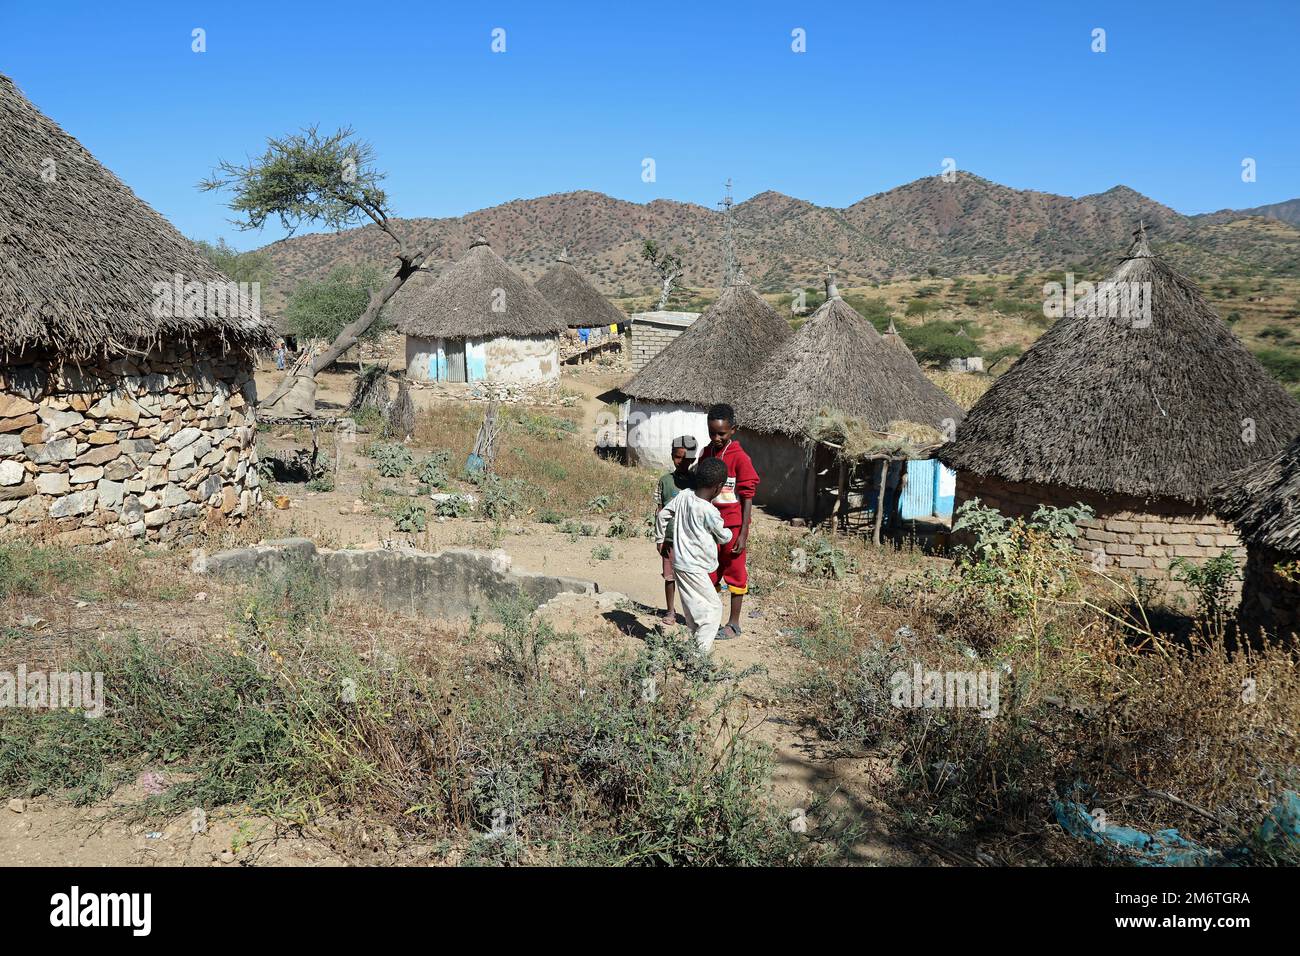 Boys playing in a traditional village in the Eritrean Highlands Stock Photo